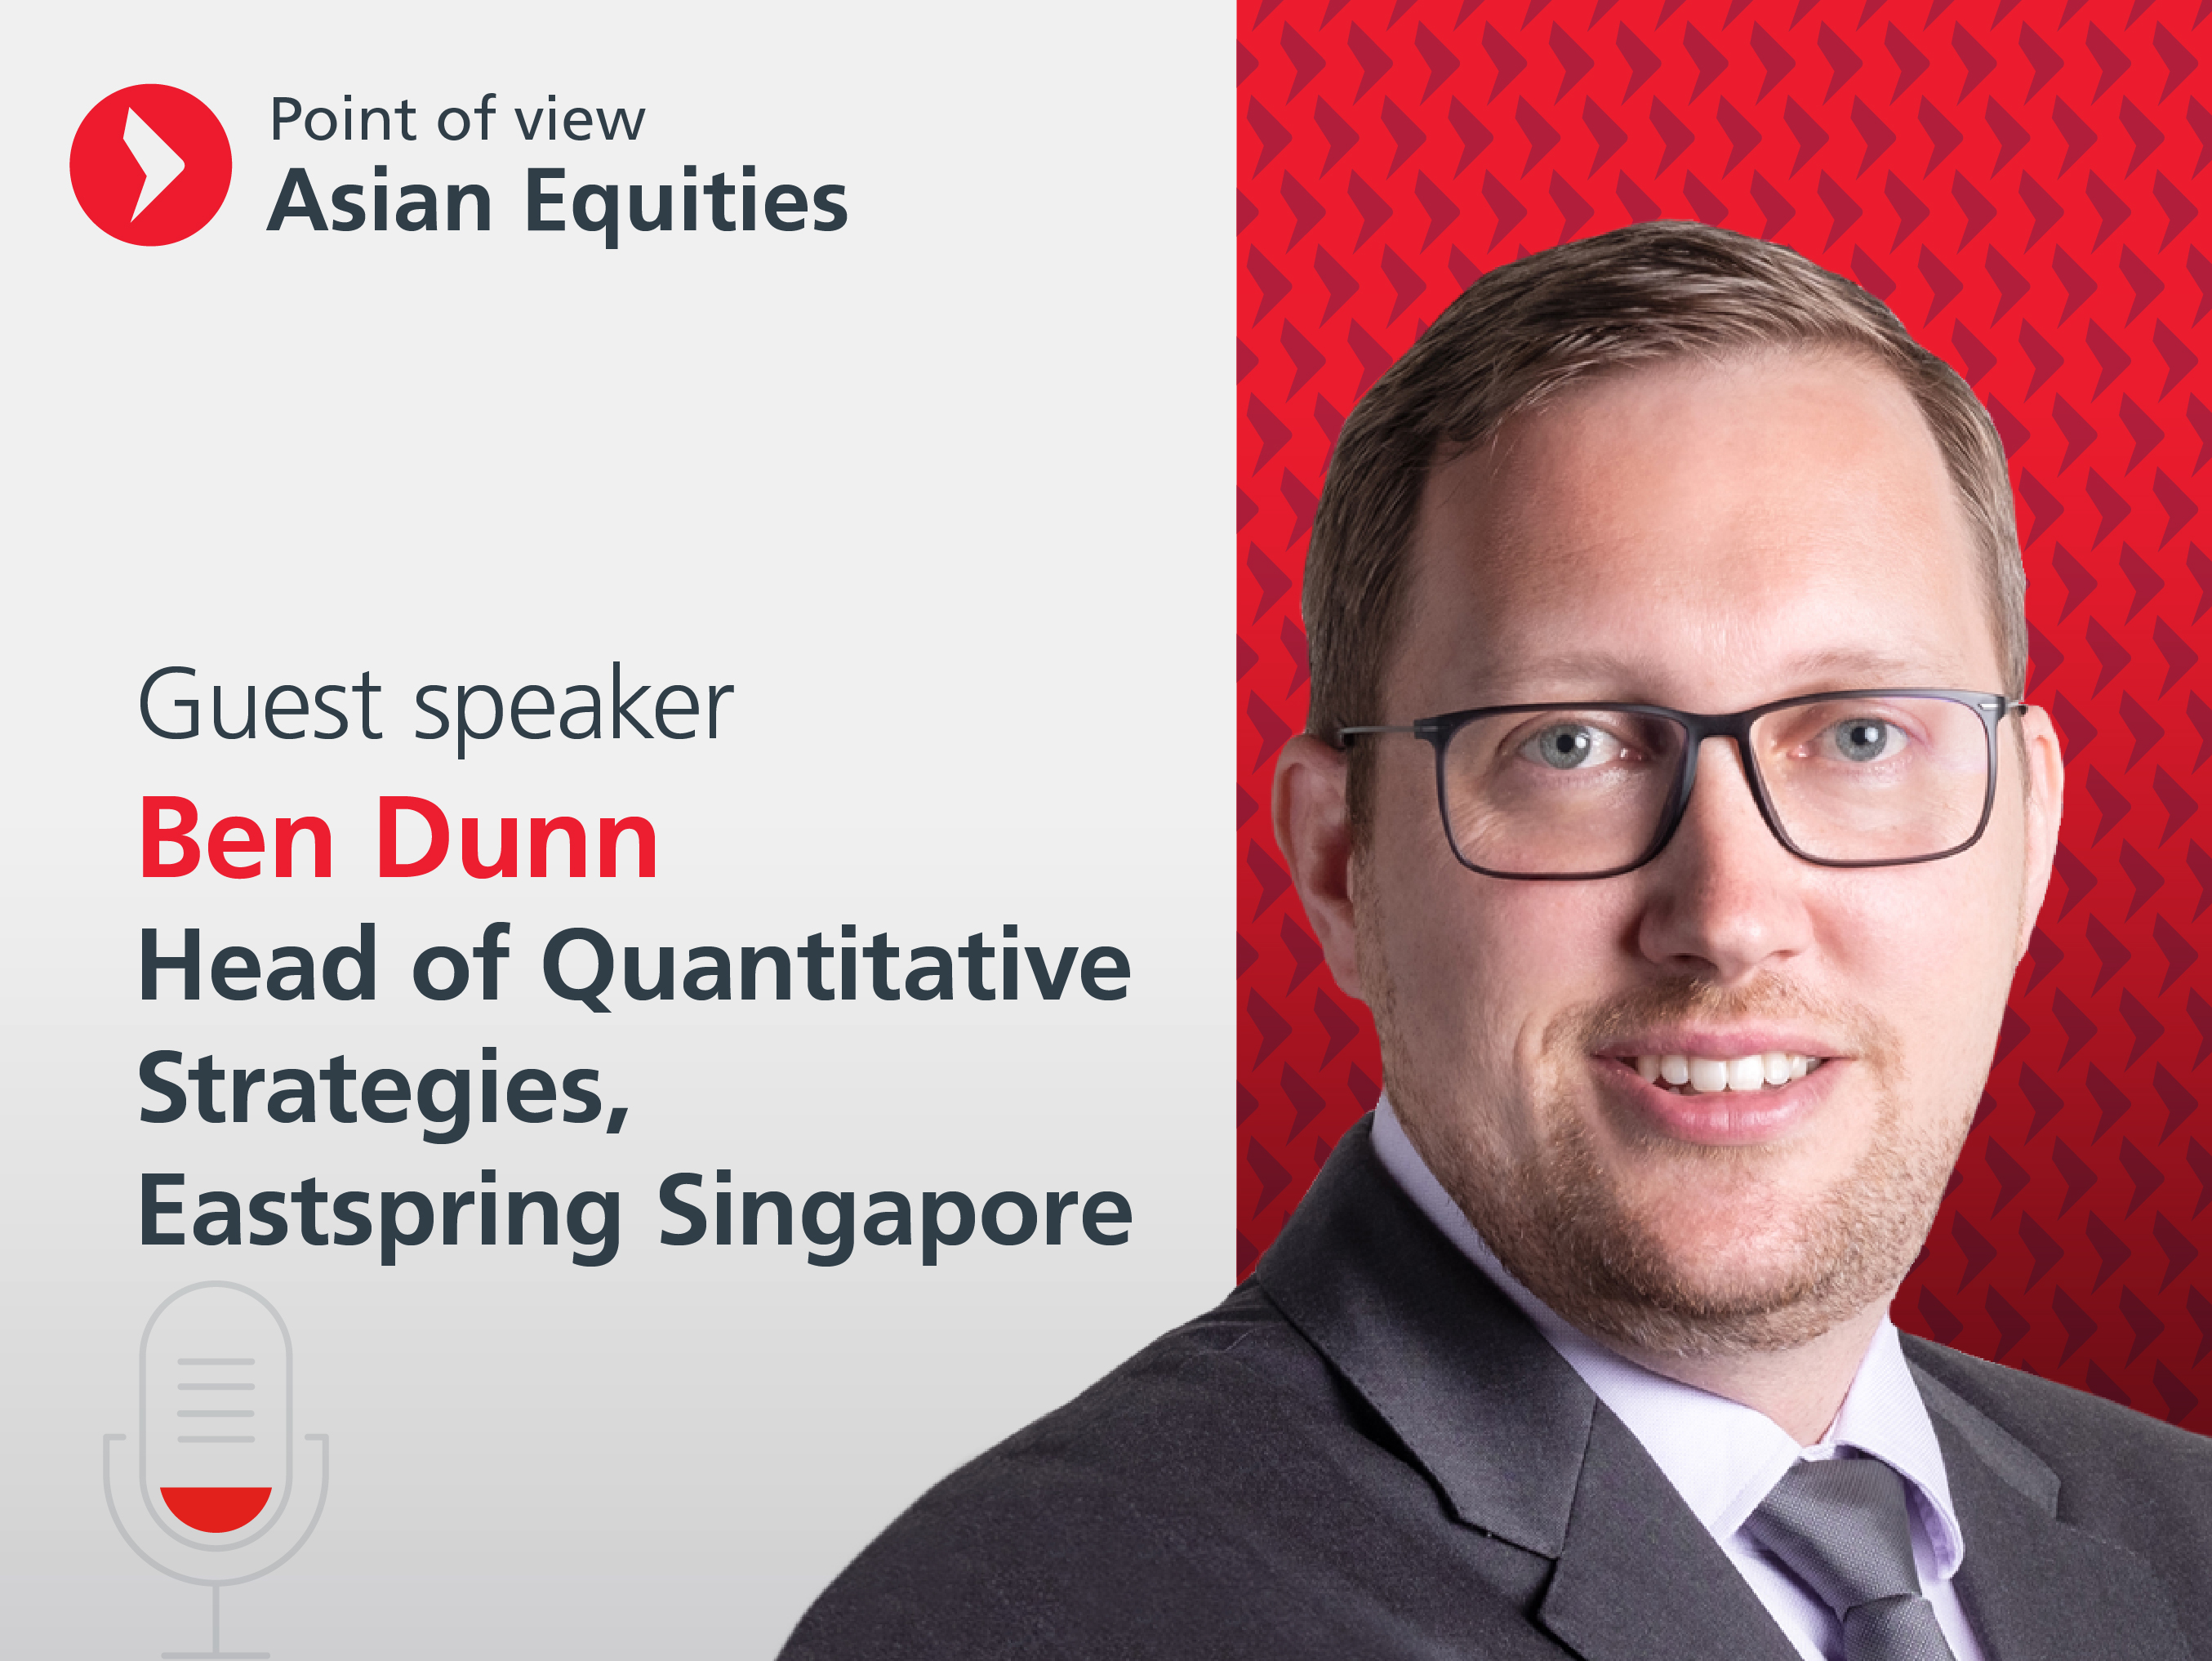 Using a quant approach to invest in Asian equities